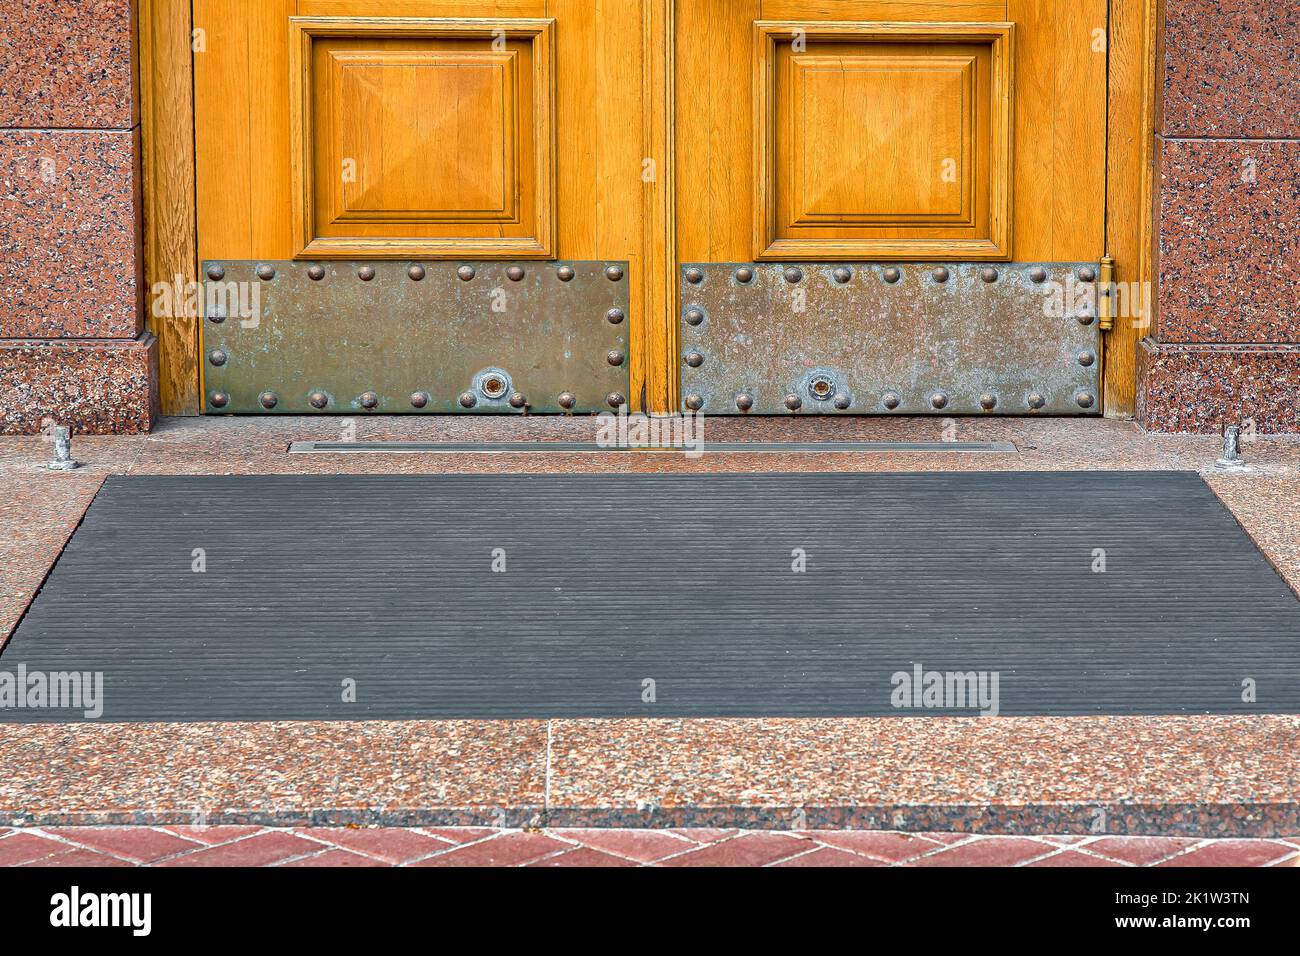 stone threshold with foot mat at the entrance door made of wood and granite stone facade cladding of old architecture building closeup front view on c Stock Photo